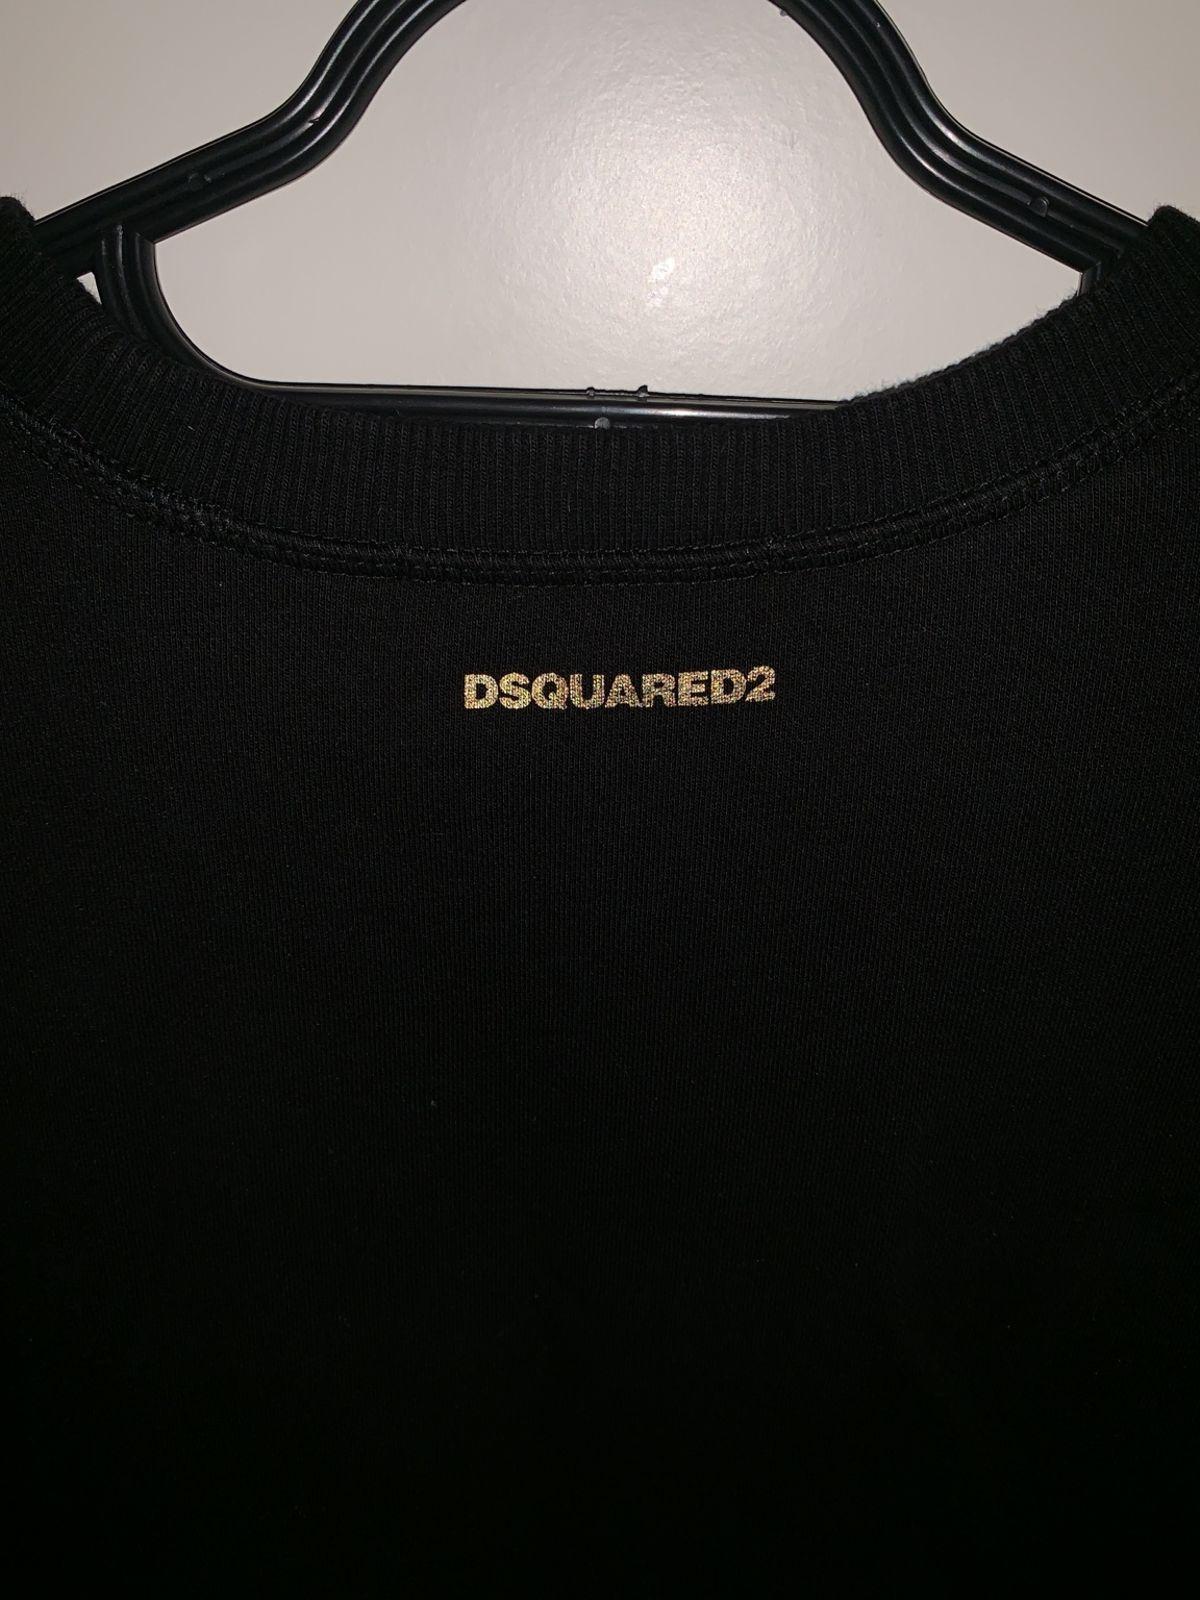 Dsquared Logo - Dsquared Icon Gold Foil Logo Print Sweatshirt in SG19 Sandy for ...